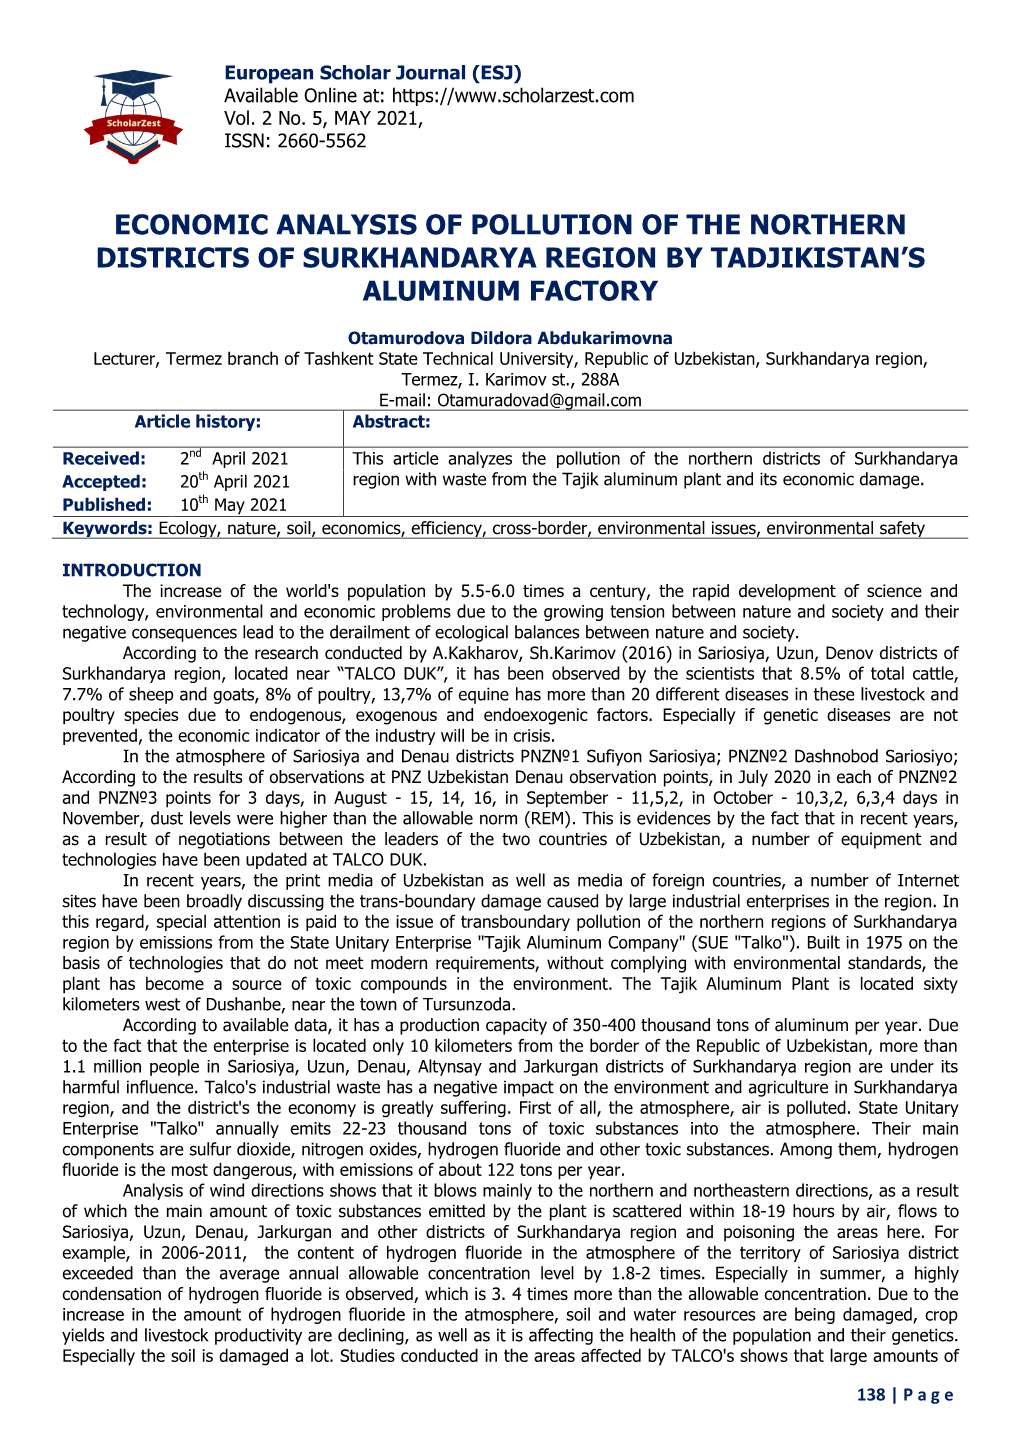 Economic Analysis of Pollution of the Northern Districts of Surkhandarya Region by Tadjikistan’S Aluminum Factory